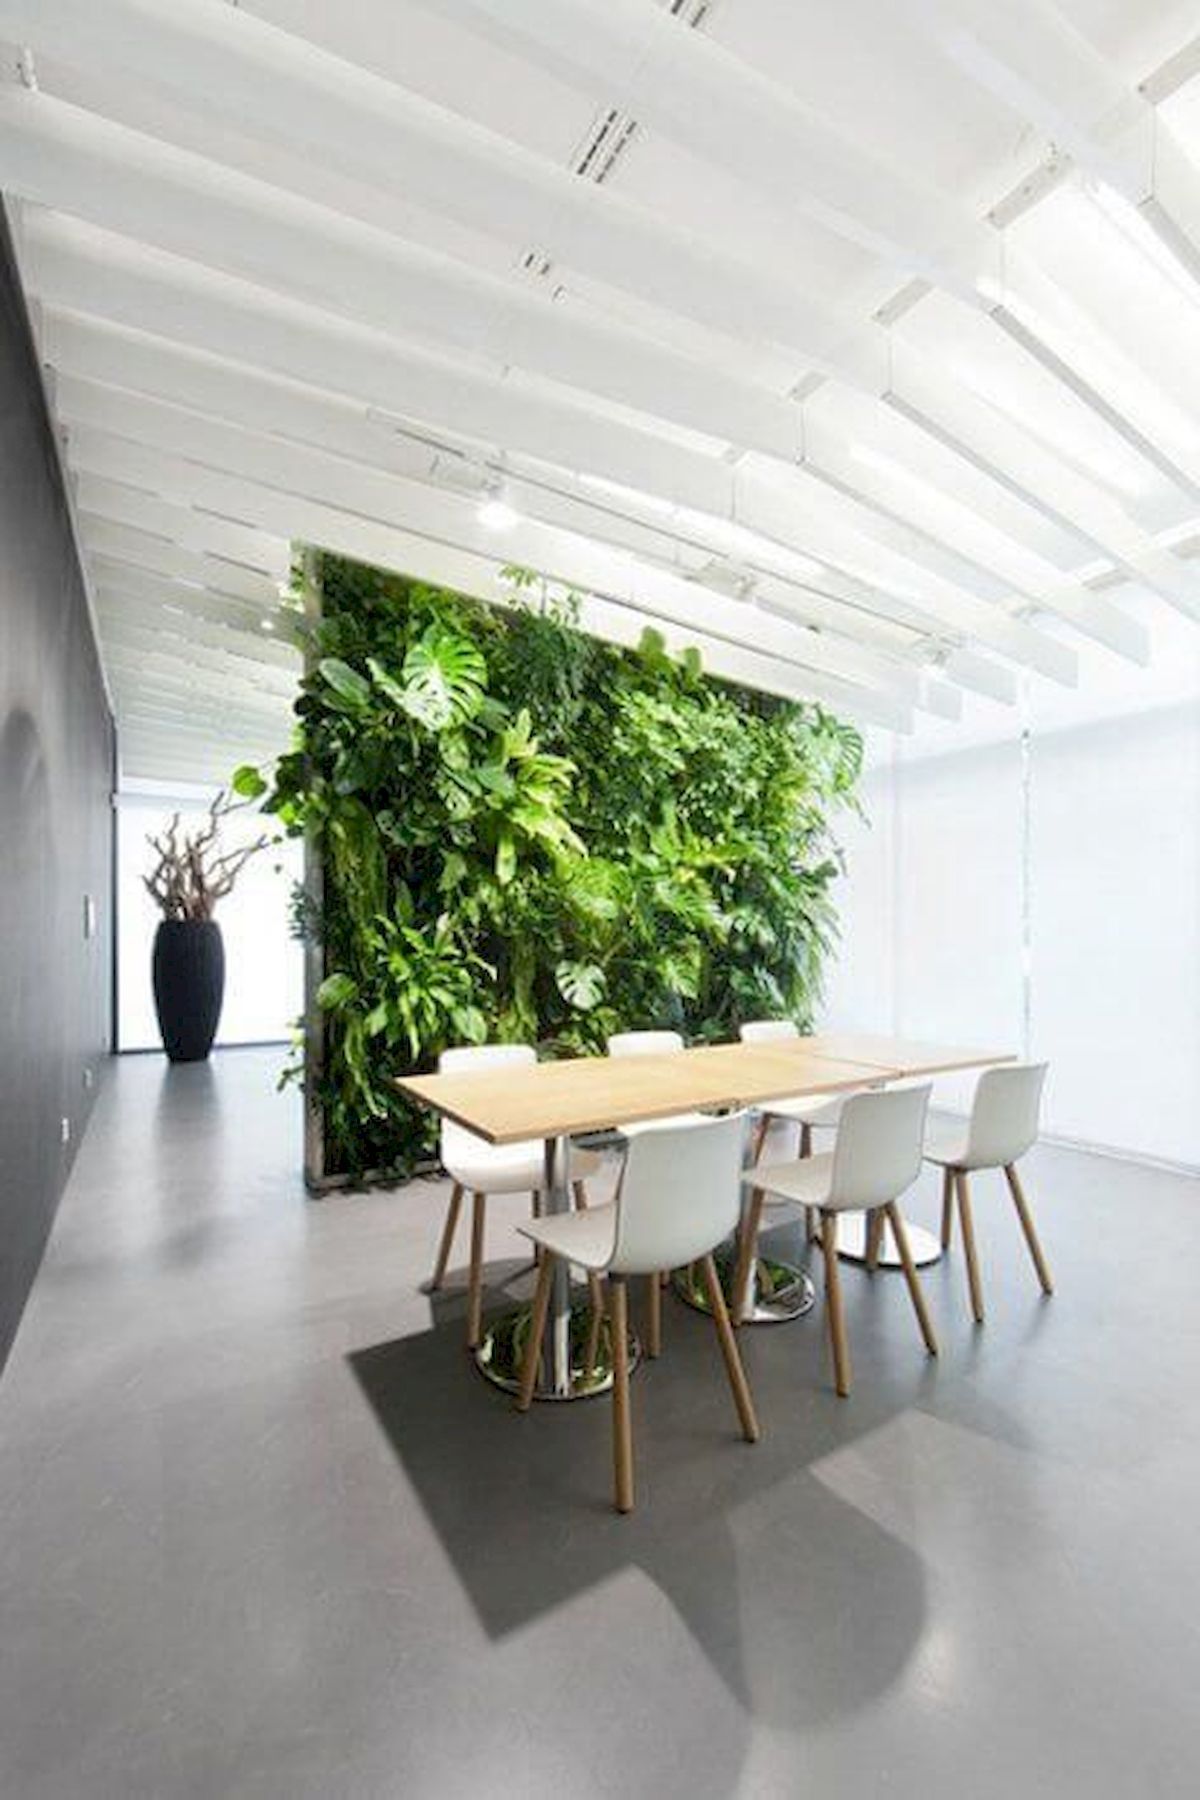 Indoor Garden Office and Office Plants Design Ideas For Summer -   13 plants Office workspaces ideas